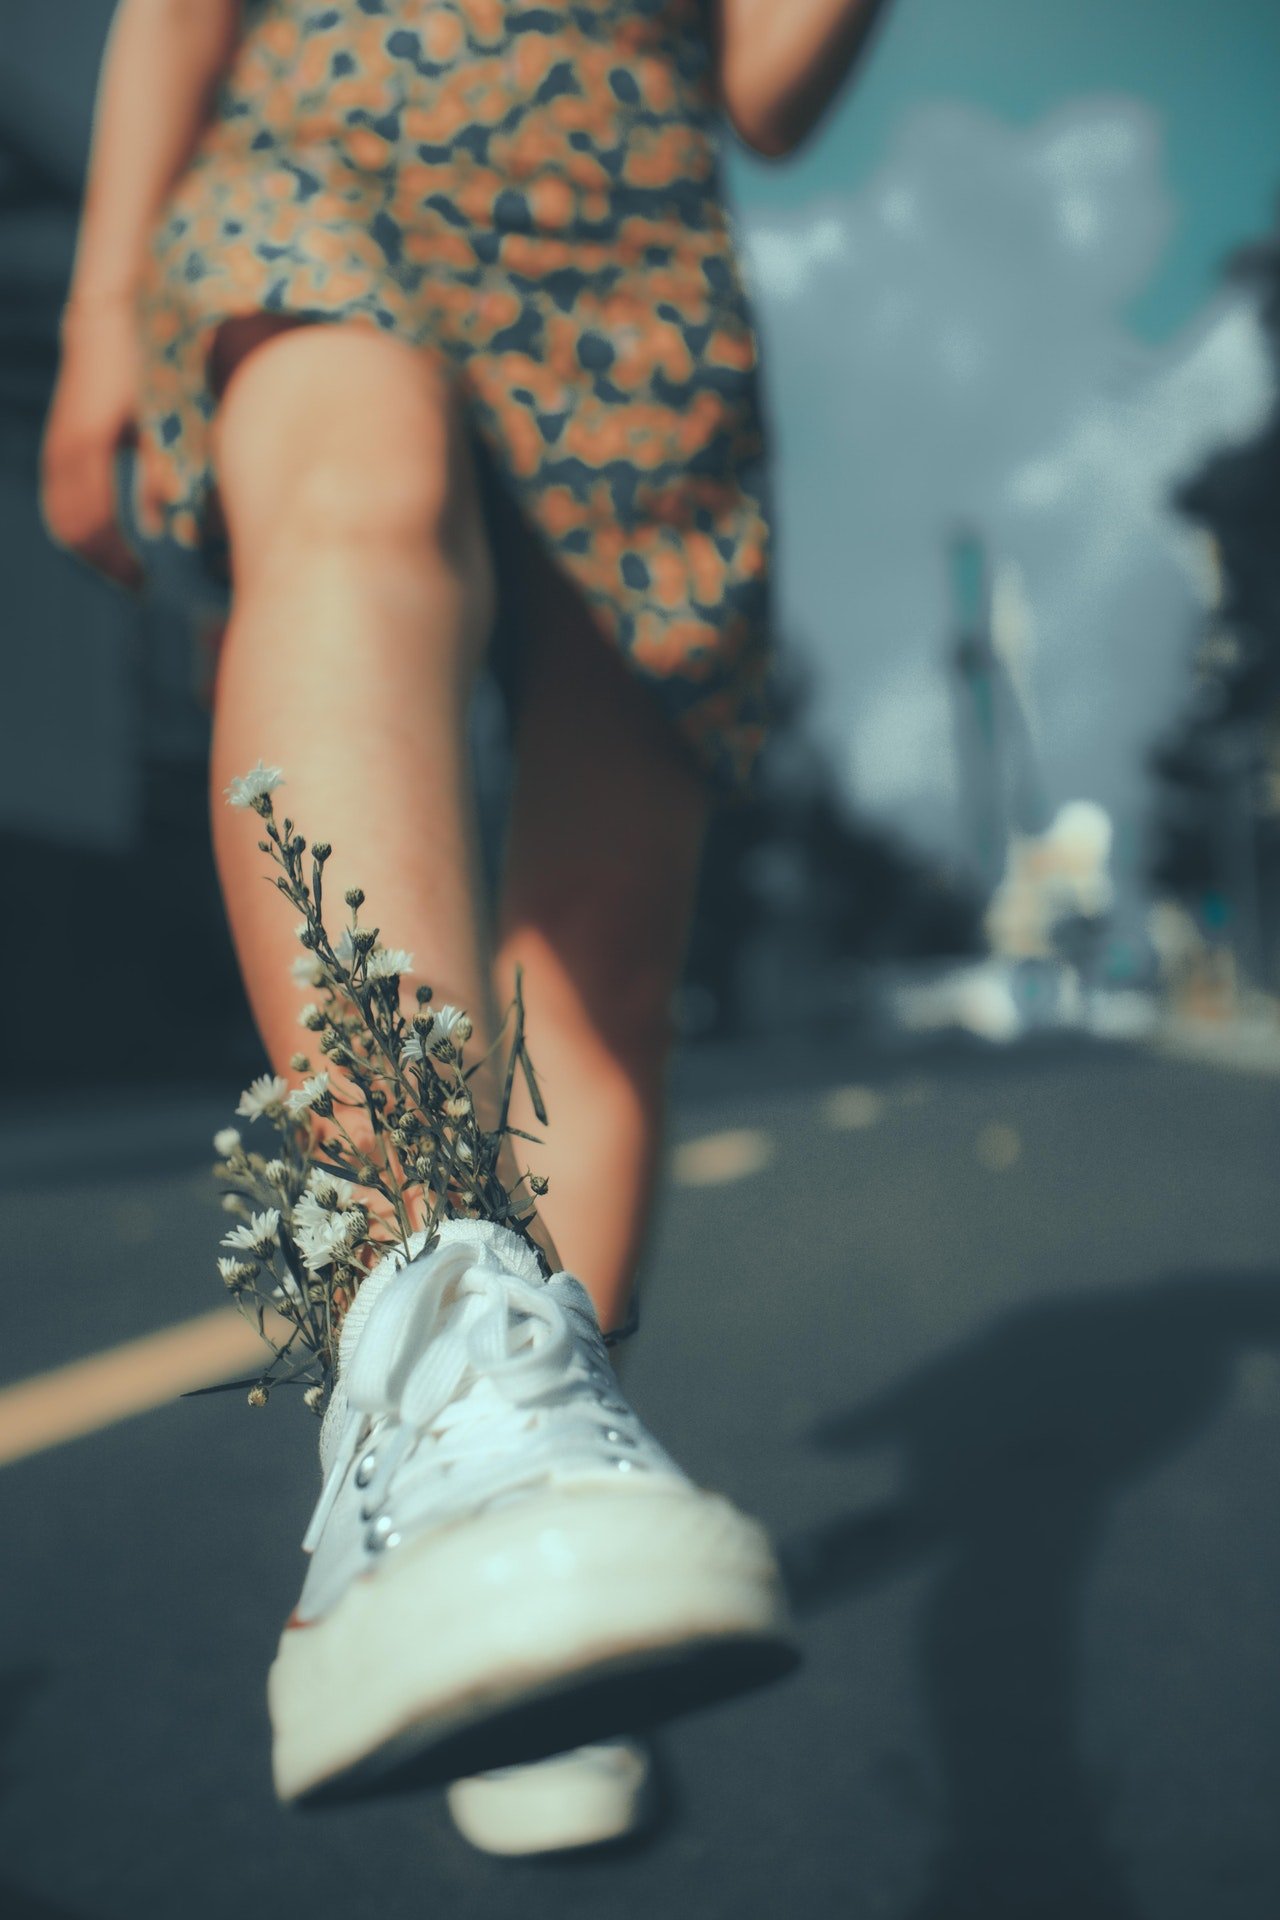 Amelia was delighted by the work the man did on her shoes, and she decided to do something with the picture she had taken. | Source: Pexels